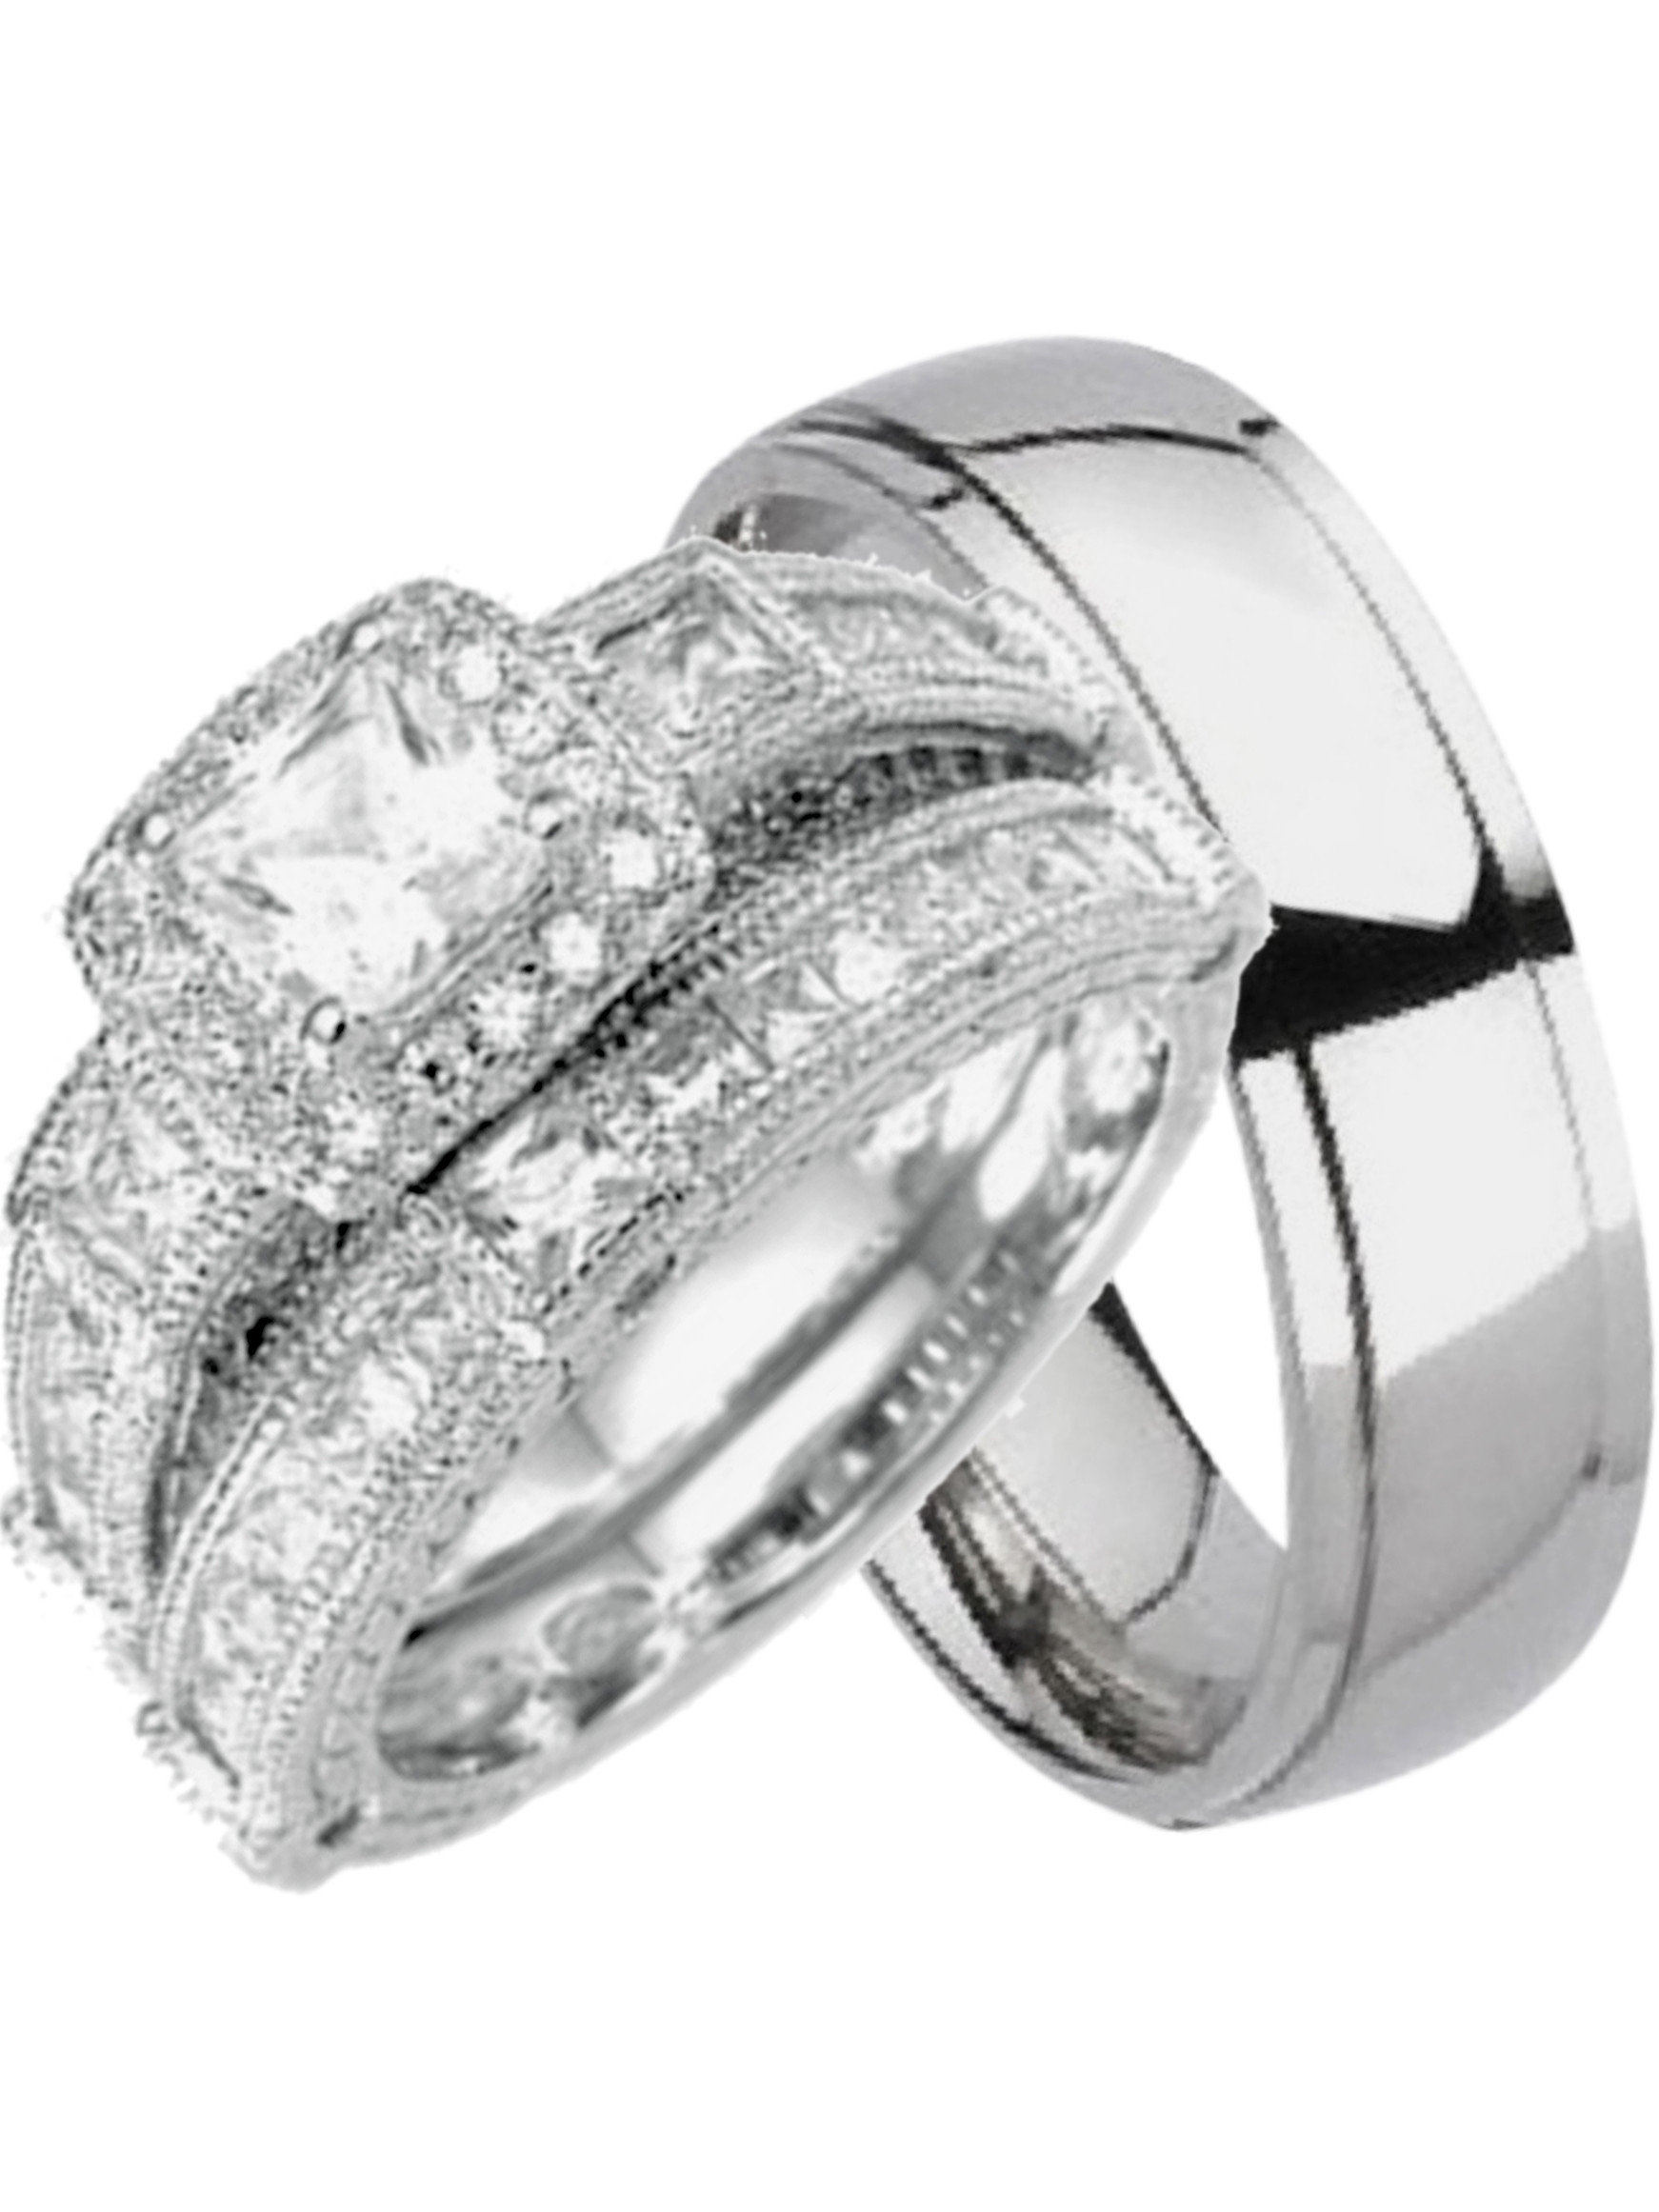 Walmart His And Hers Wedding Rings
 LaRaso & Co His and Hers Wedding Sets Silver Titanium 3